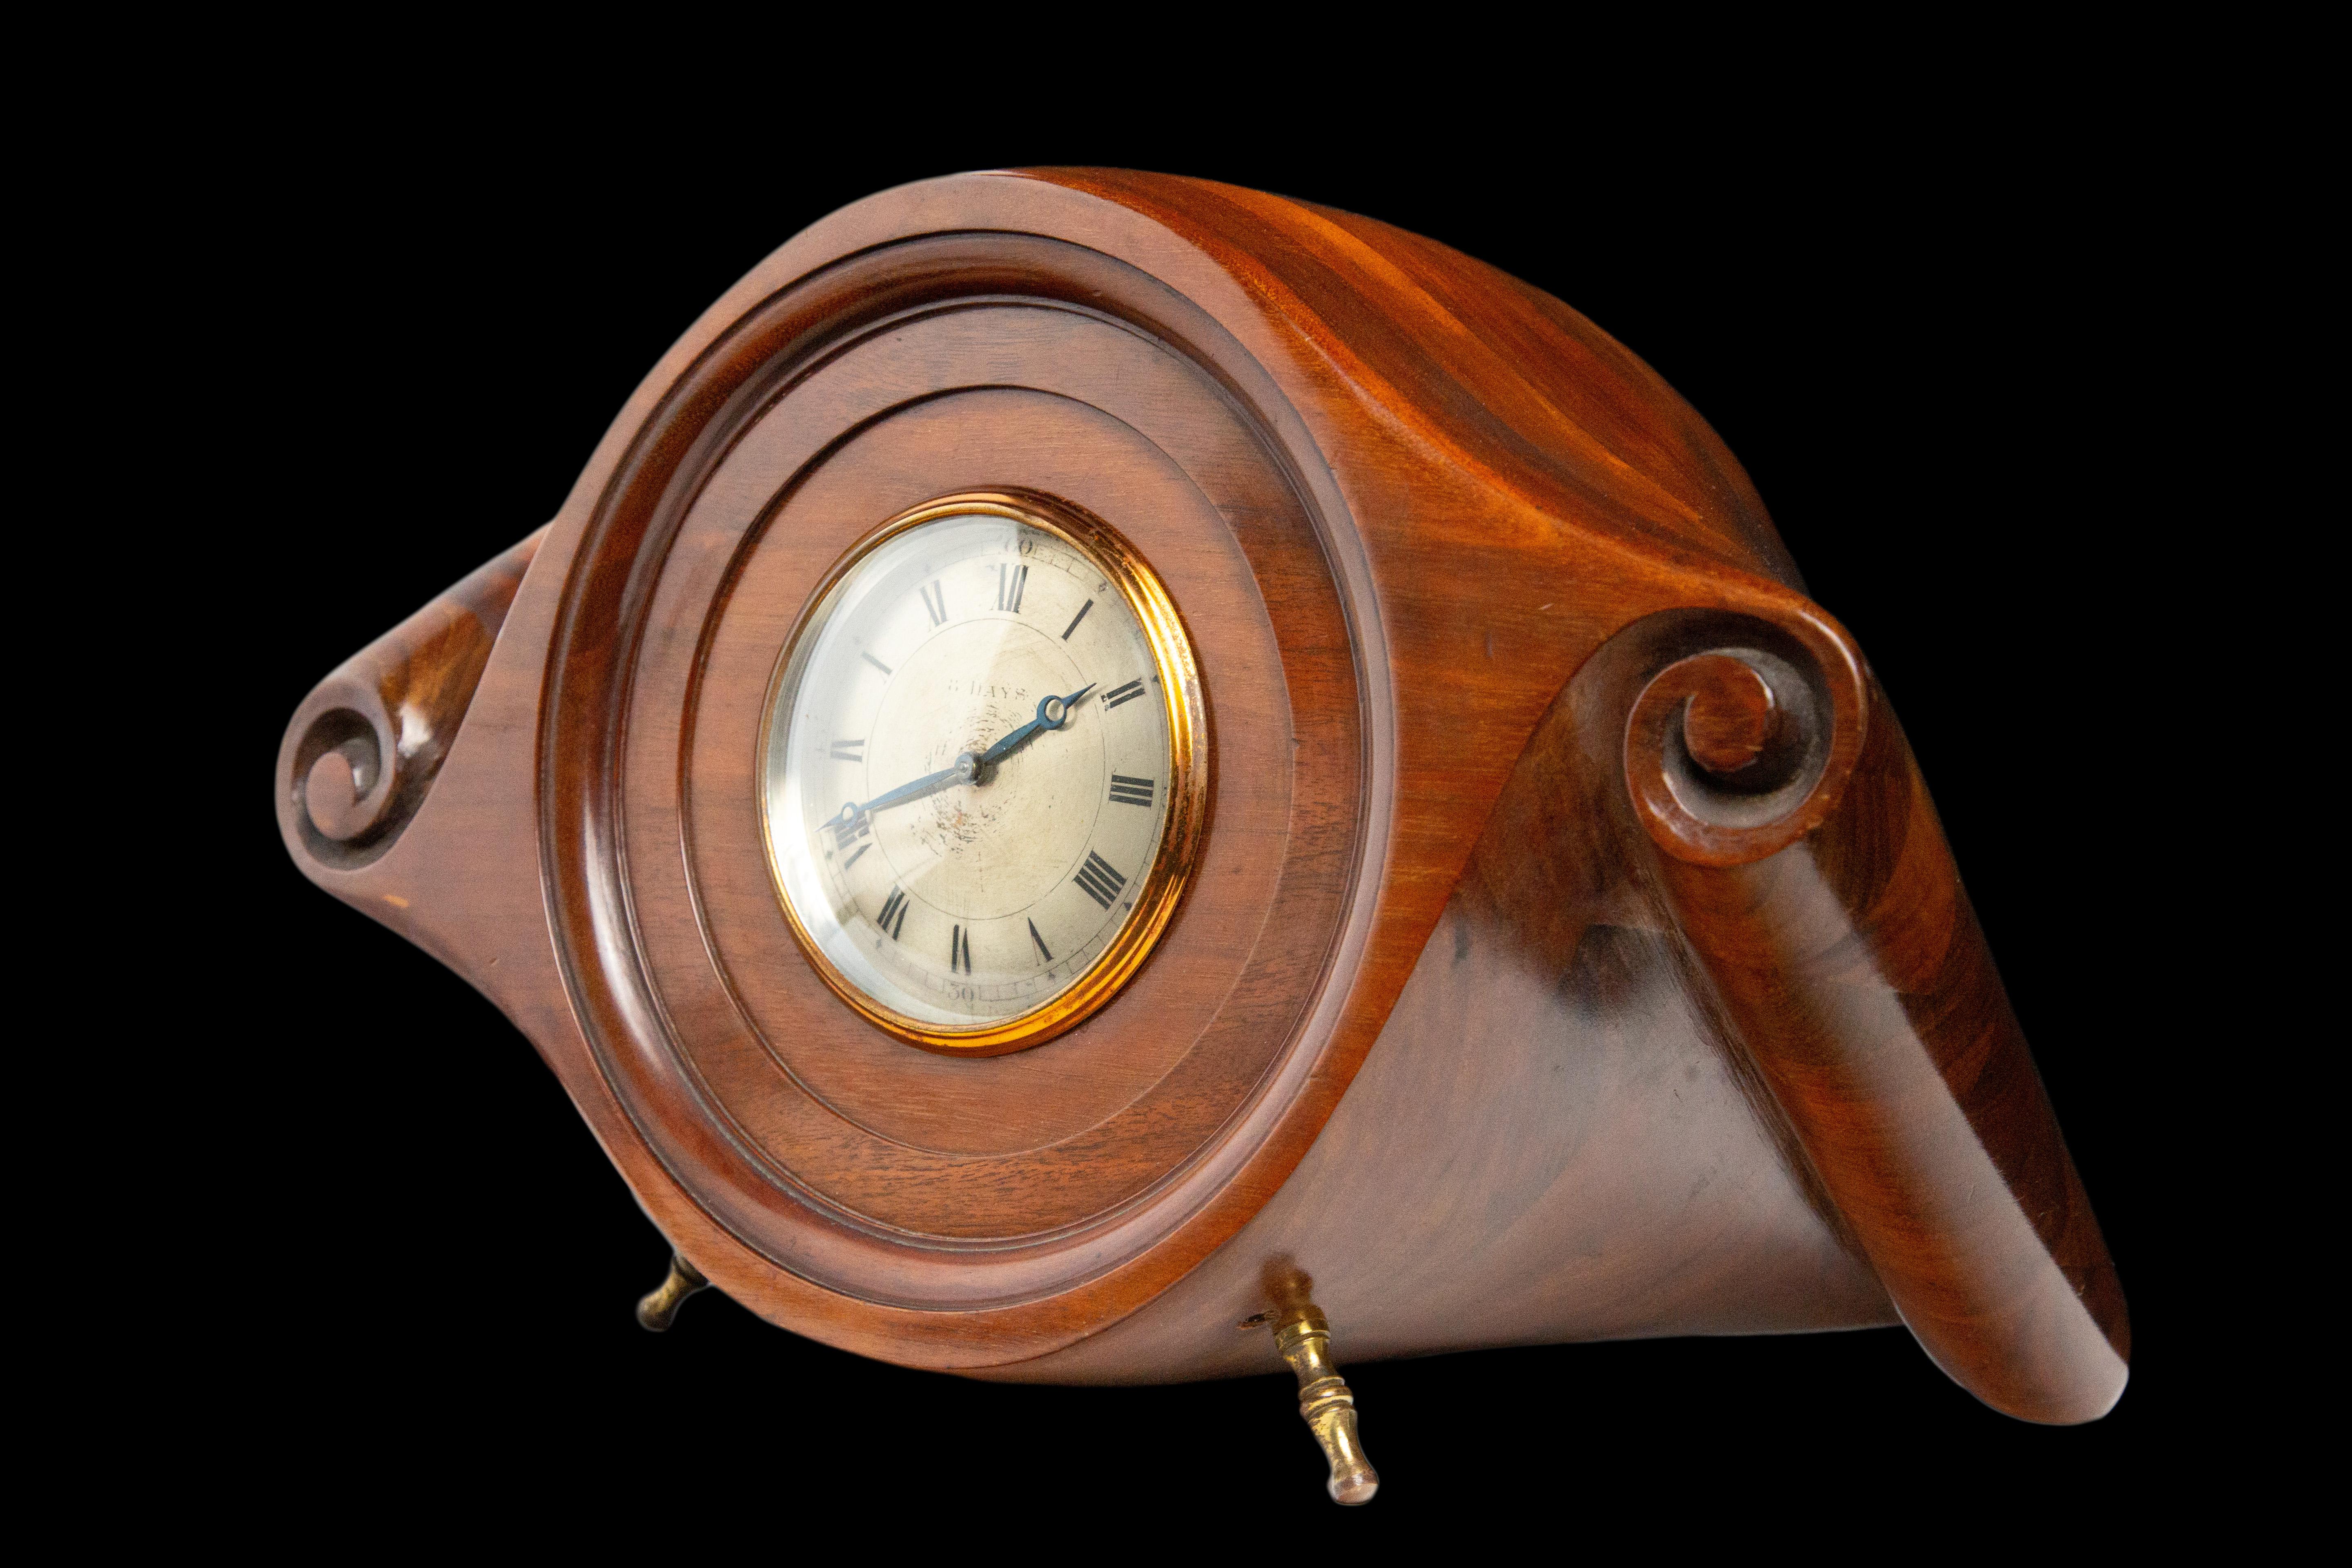 French Propeller Hub Clock from the Early 20th Century